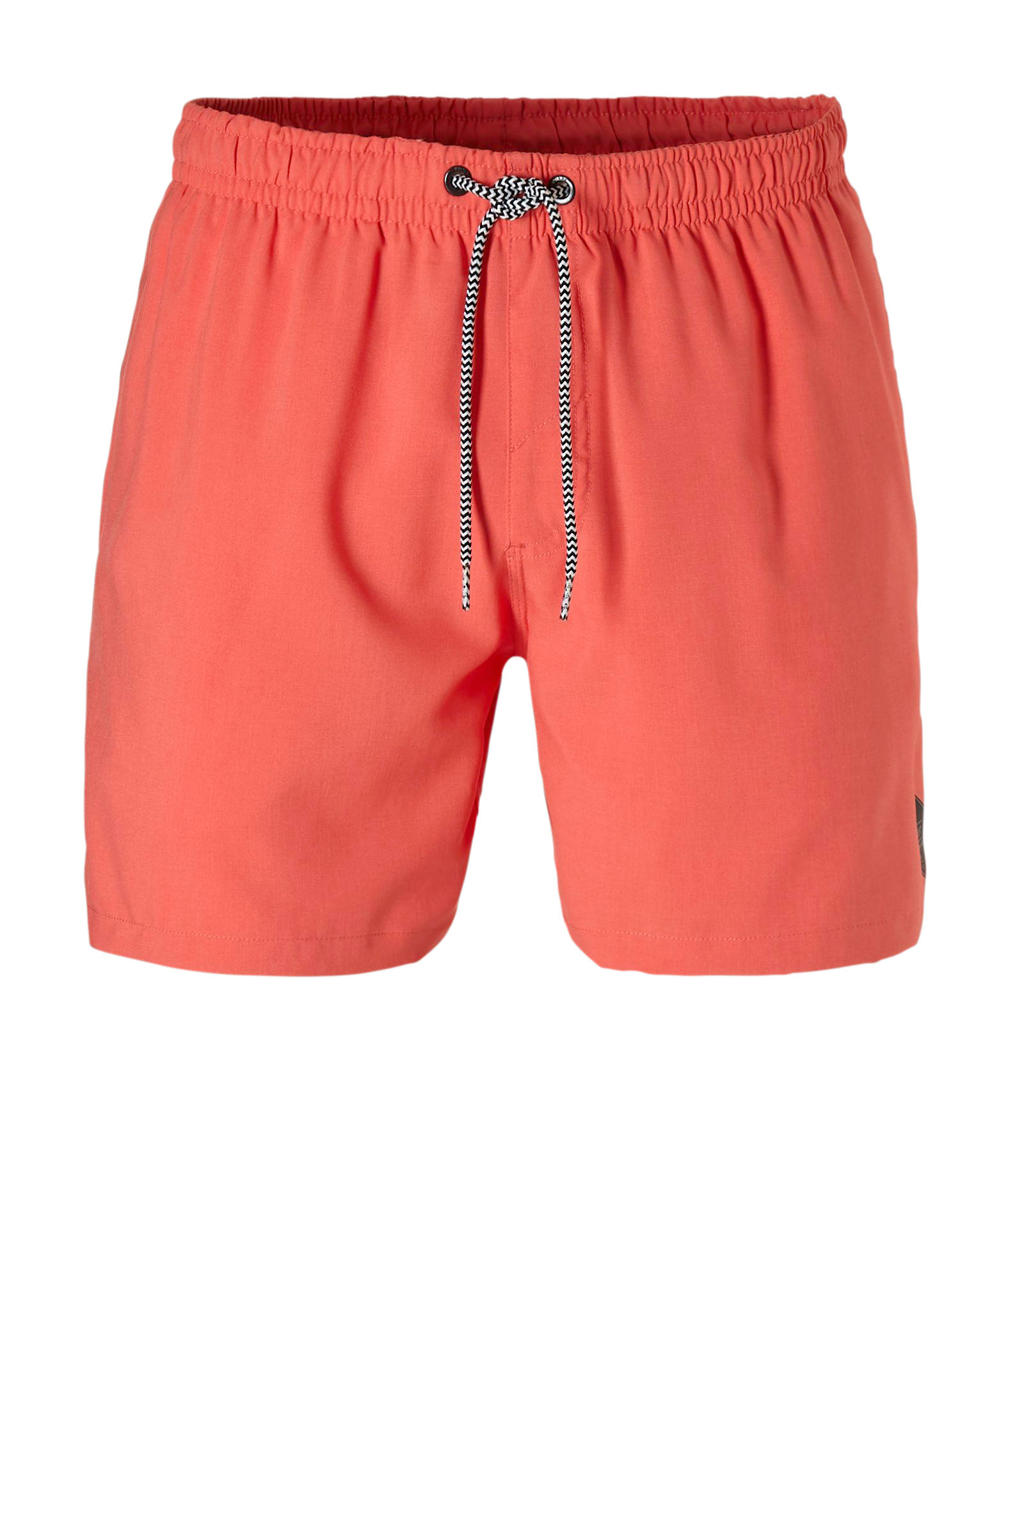 Protest zwemshort rood